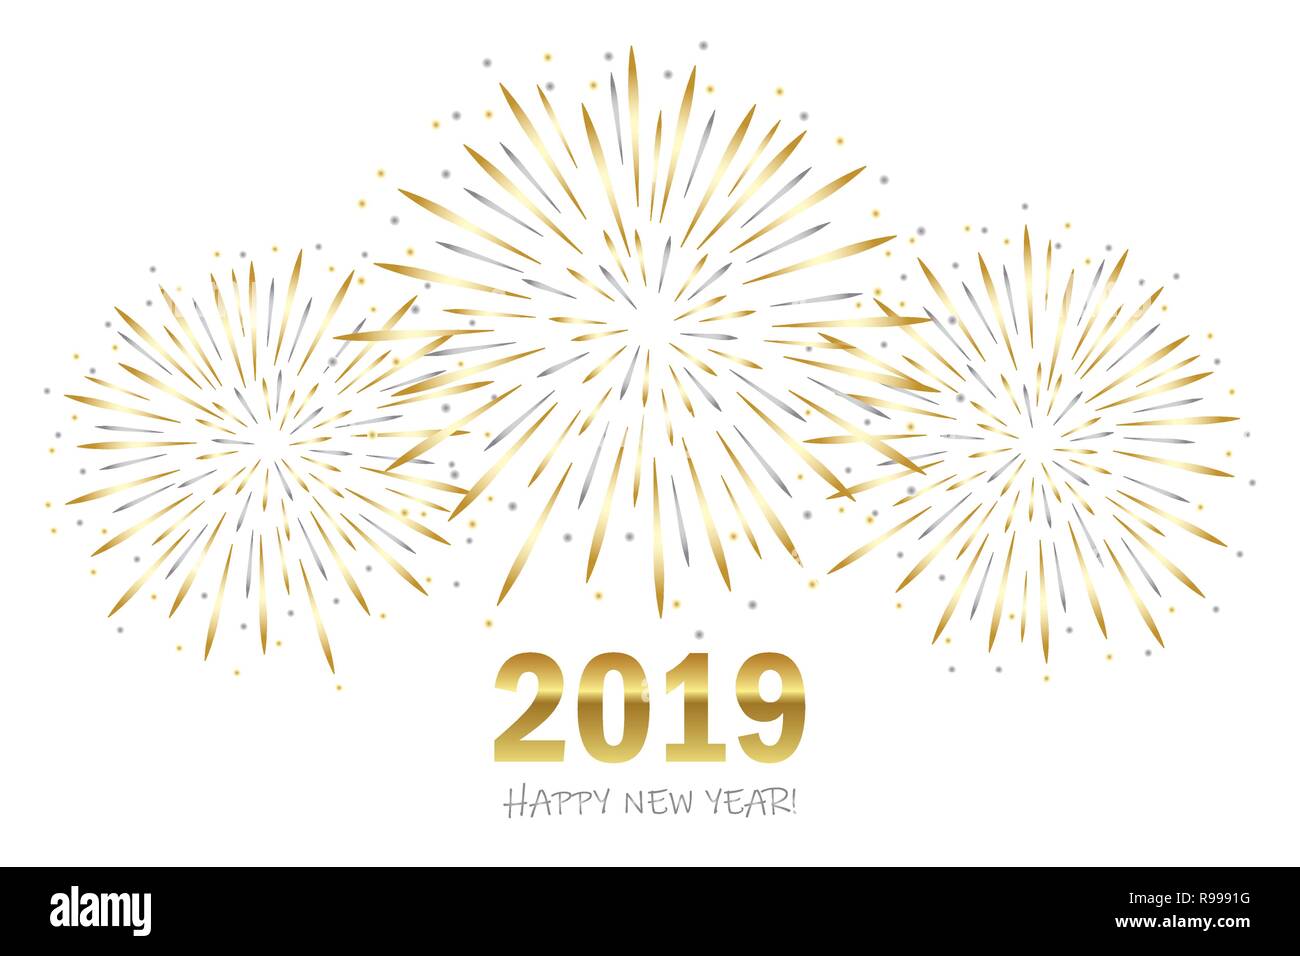 happy new year greeting card 2019 with gold and silver firework vector illustration EPS10 Stock Vector